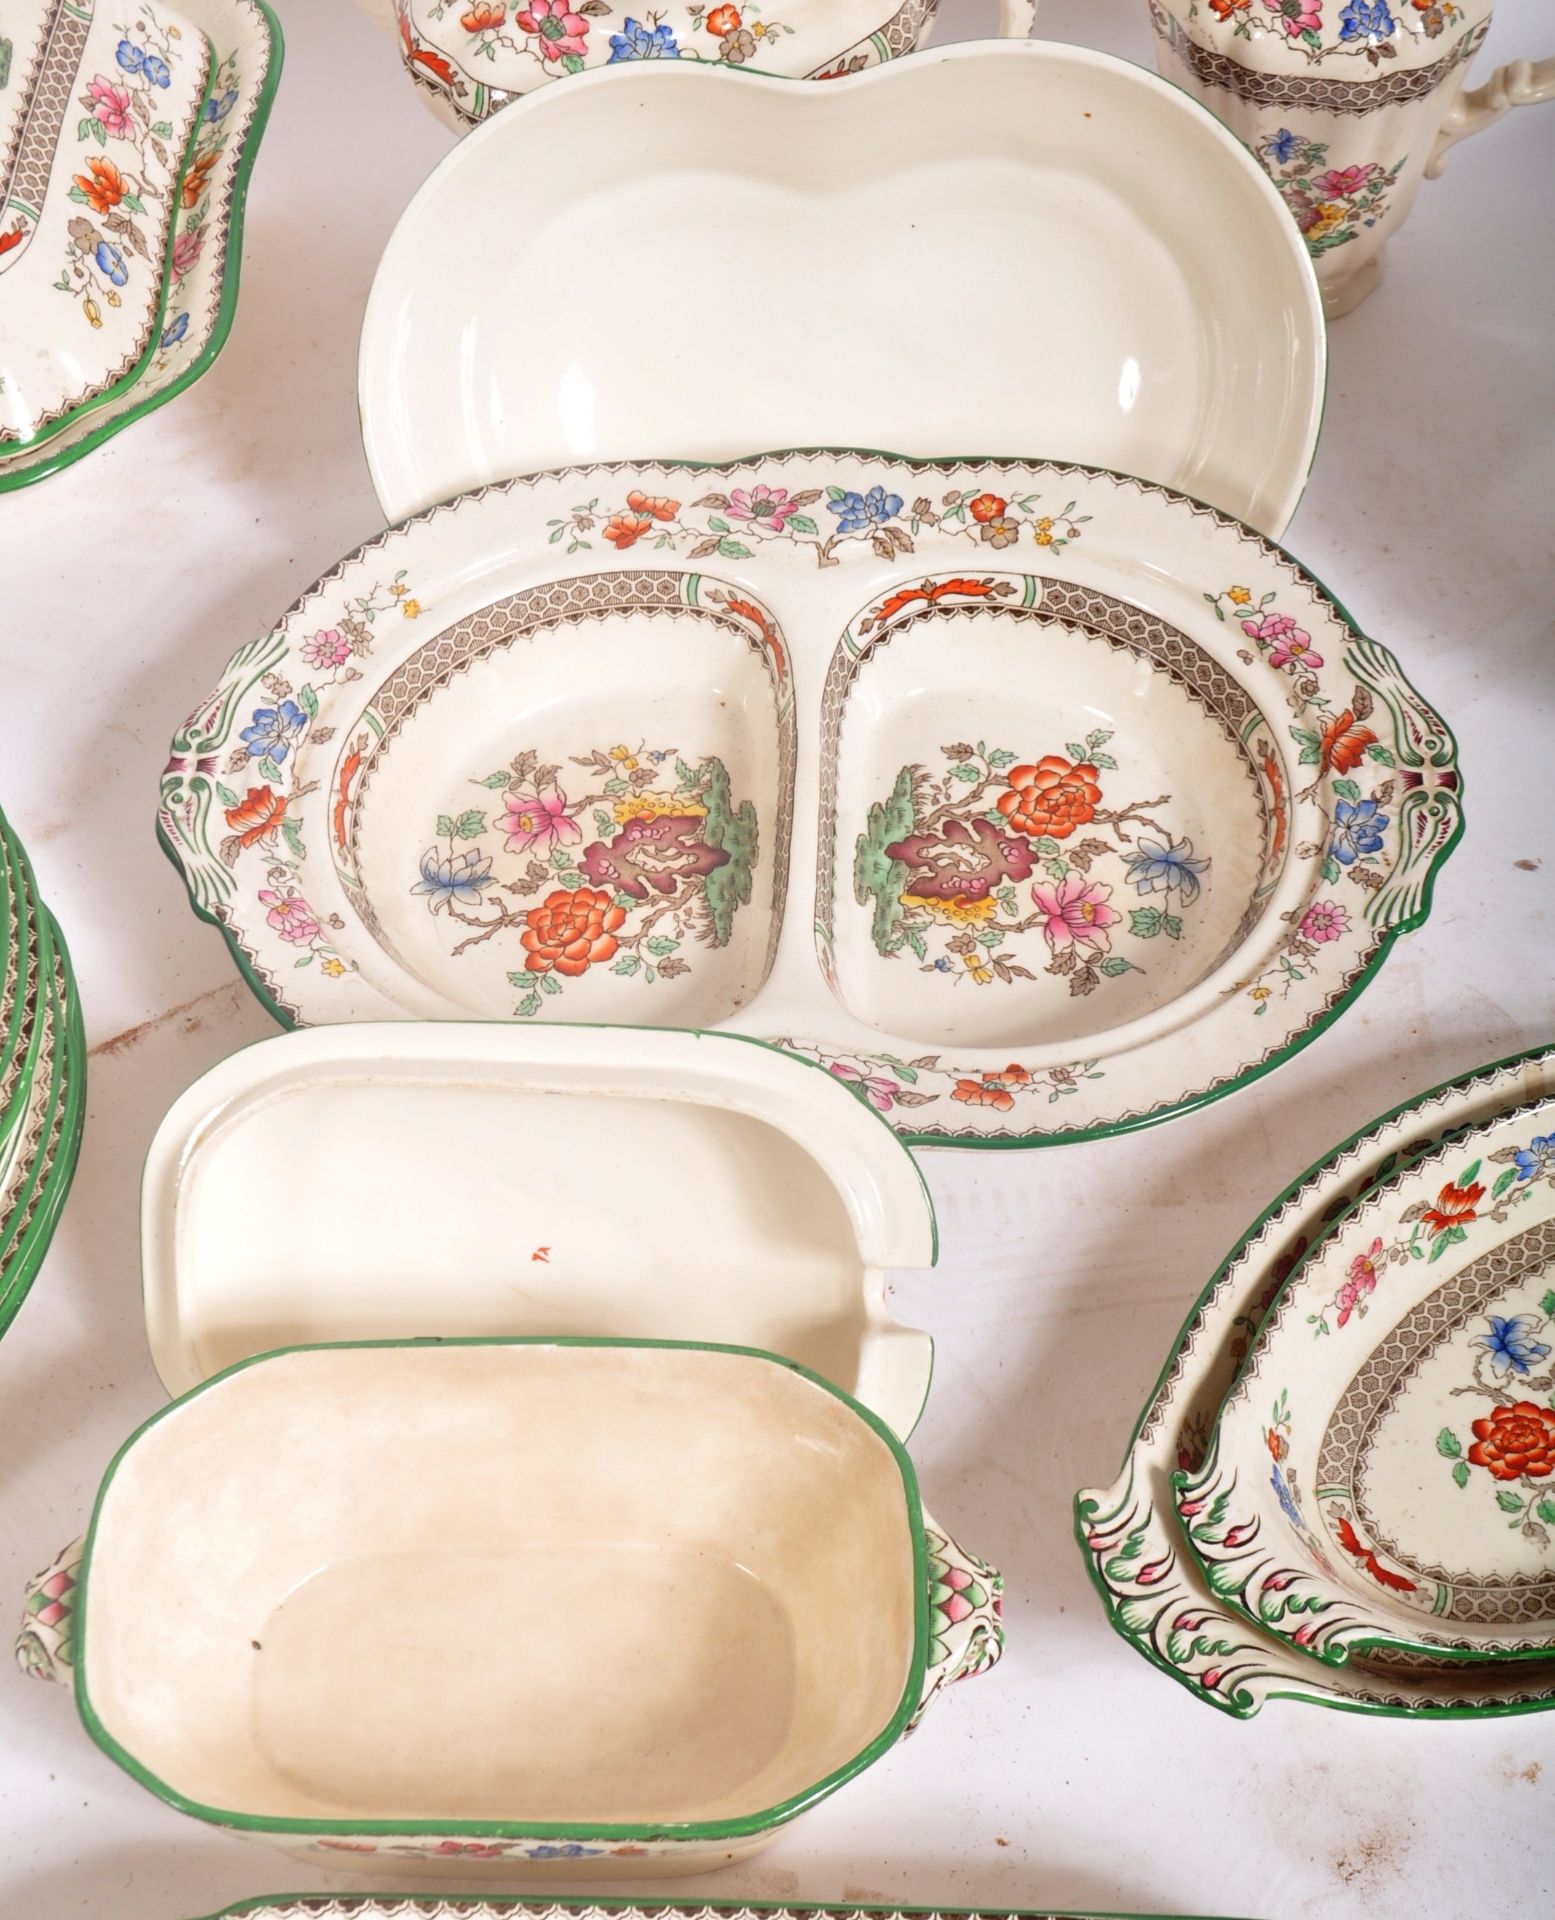 COPELAND SPODE CHINESE ROSE PATTERN DINNER SERVICE - Image 9 of 18